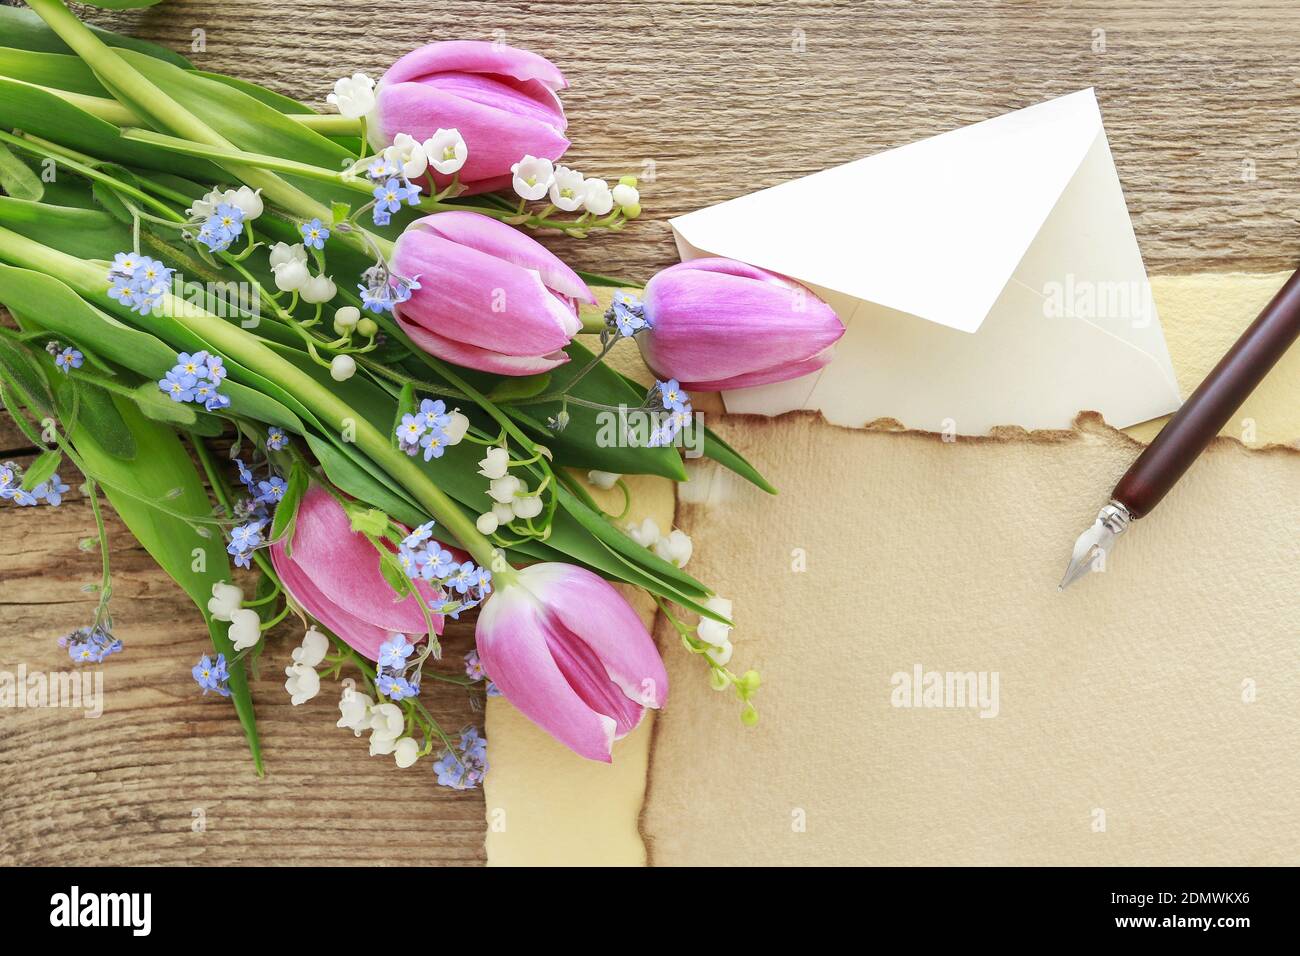 Bouquet of pink tulips, lily of the valley and forget me not flowers. Spring decor Stock Photo